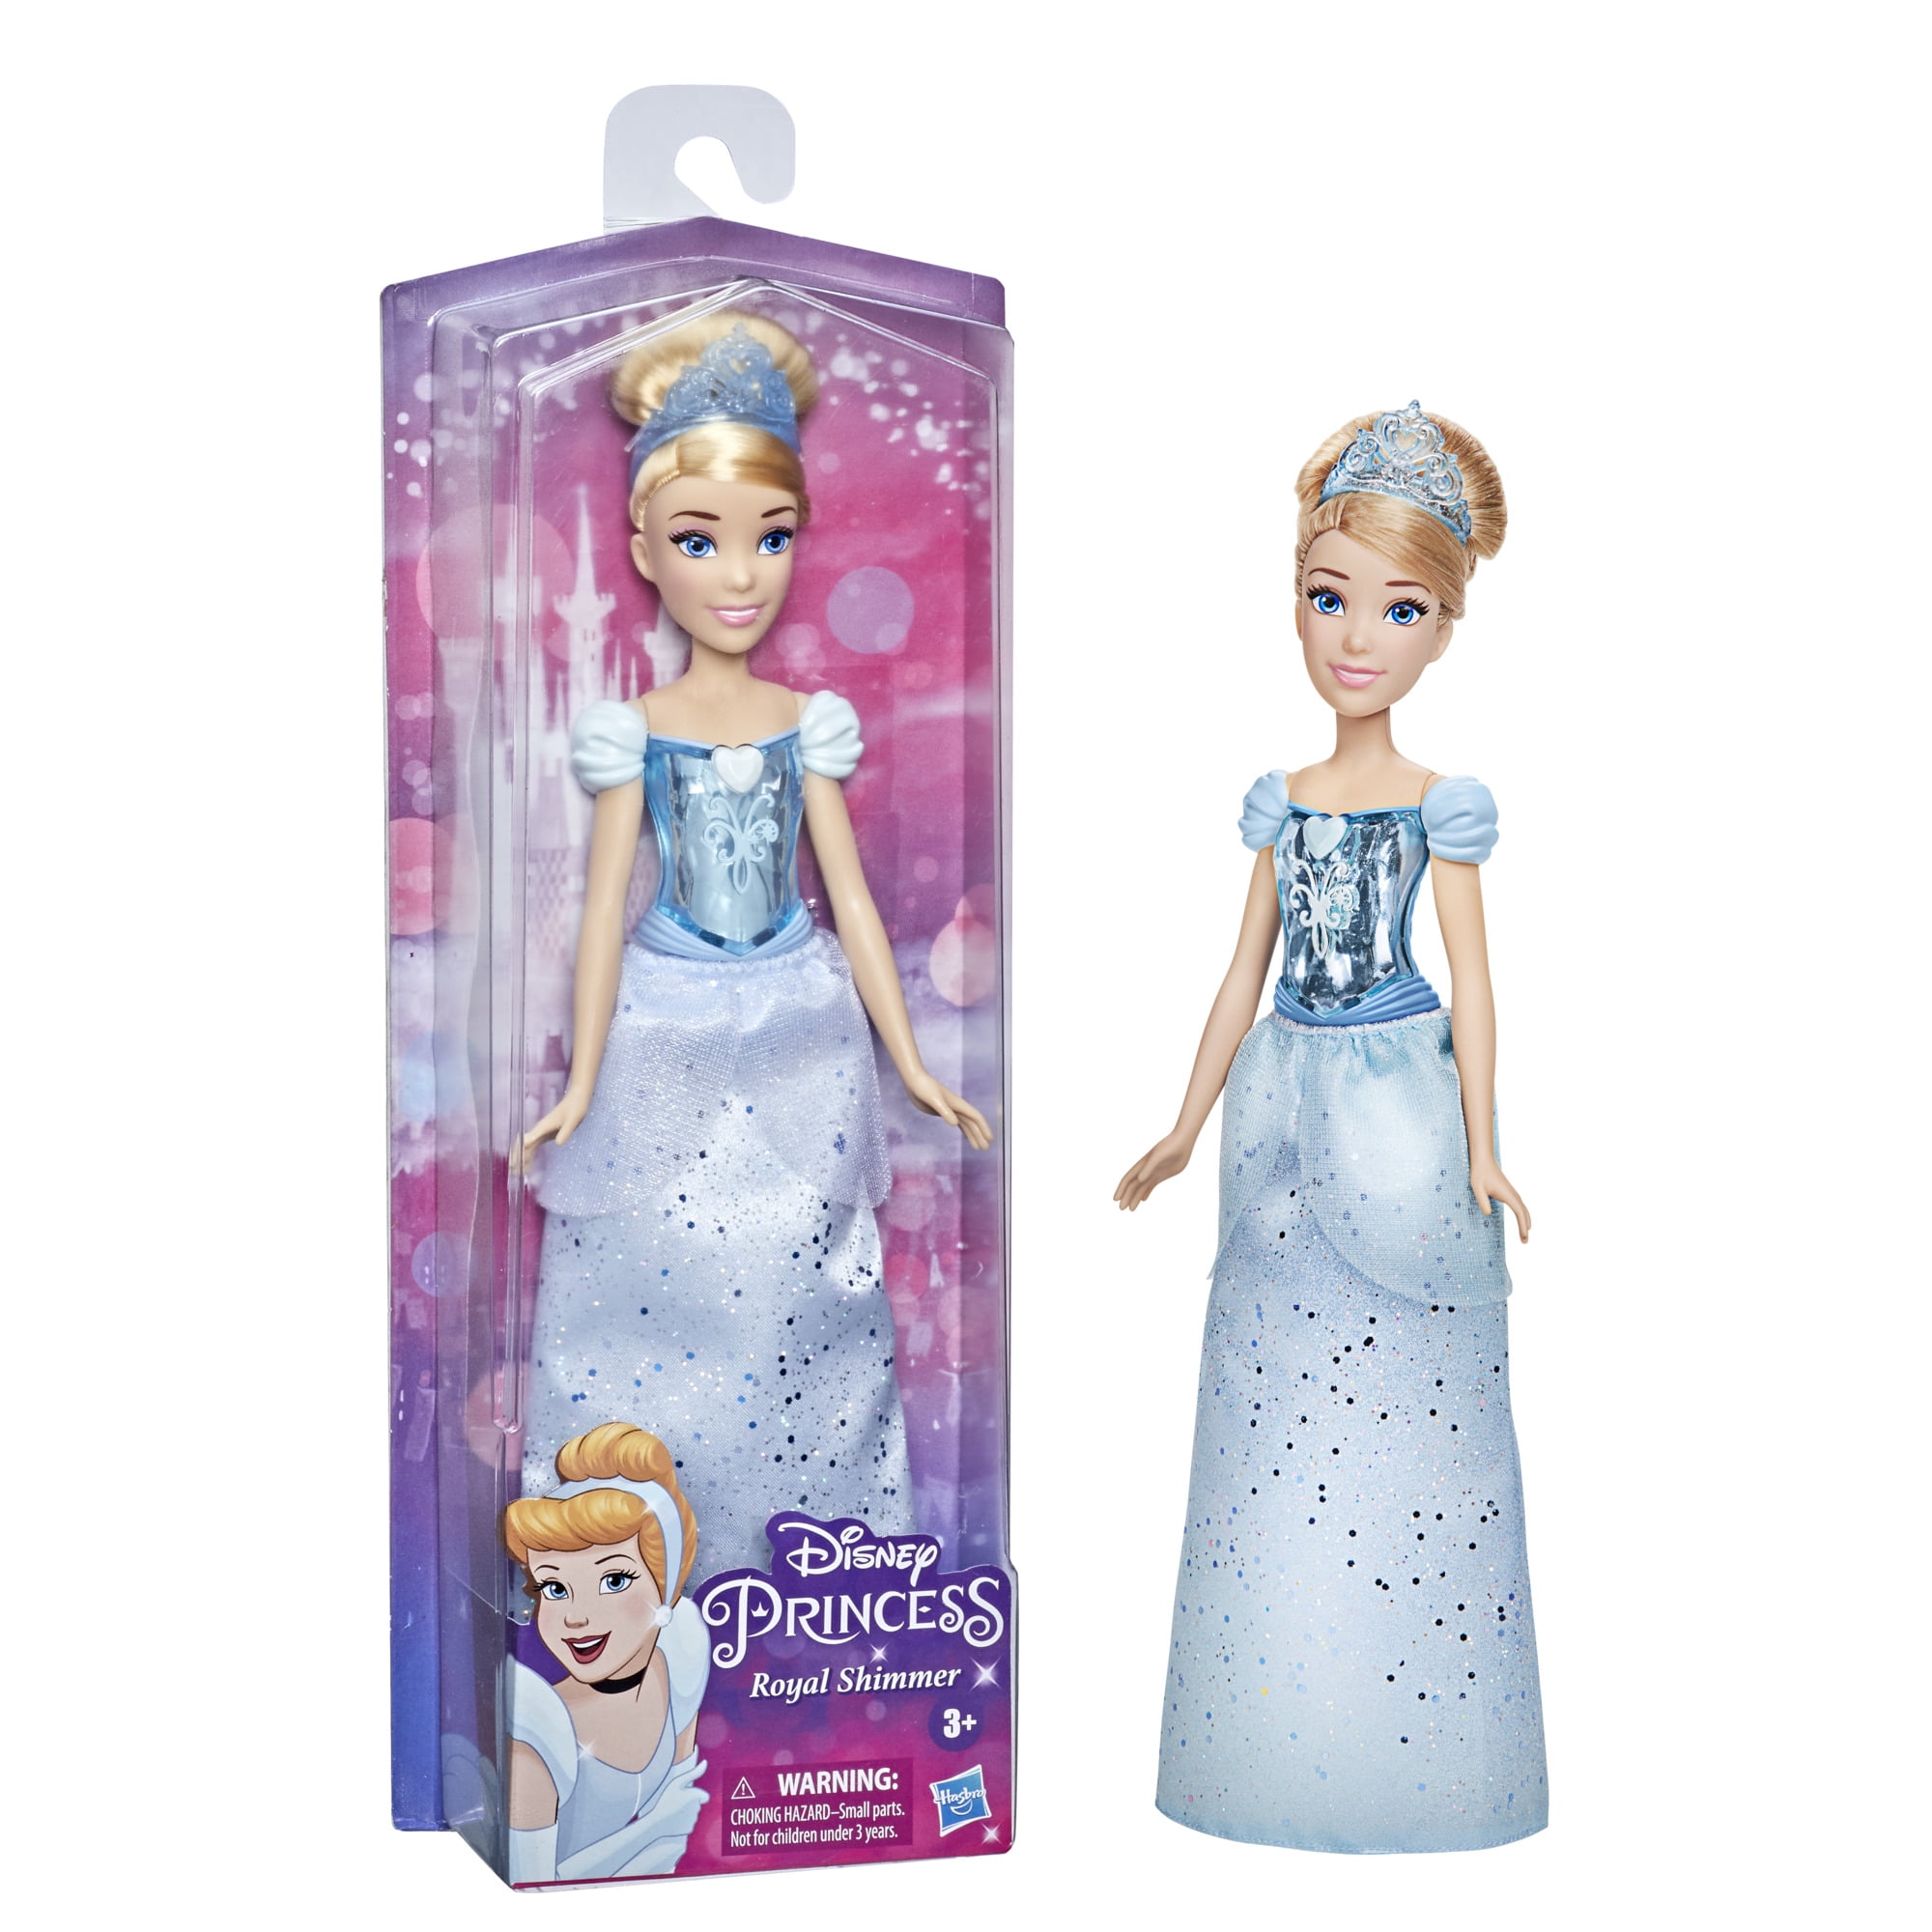 Disney Princess Royal Shimmer Cinderella Doll, with Skirt and Accessories